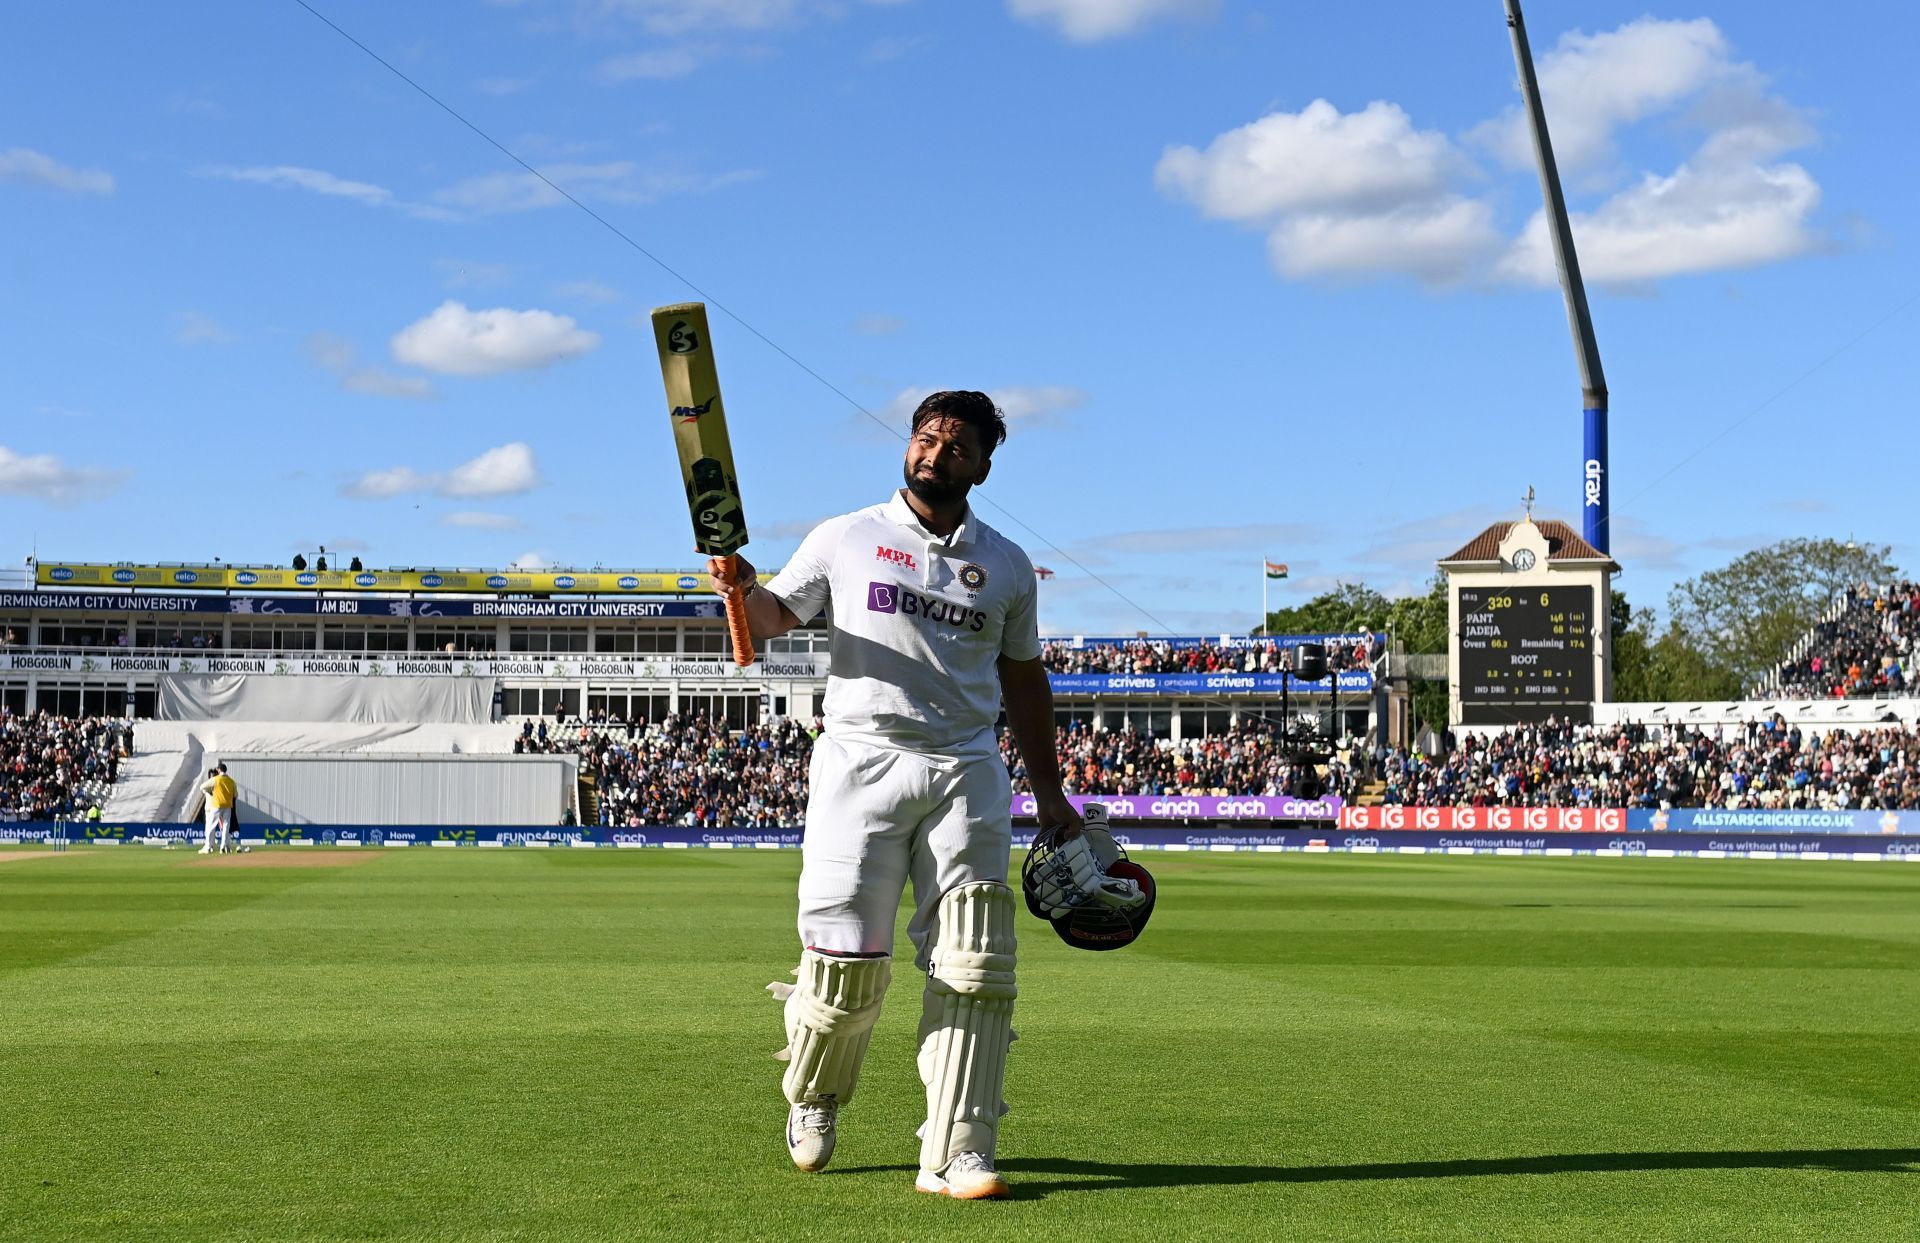 Rishabh Pant took 89 balls to complete his second Test hundred on English soil (Image Courtesy: Getty)